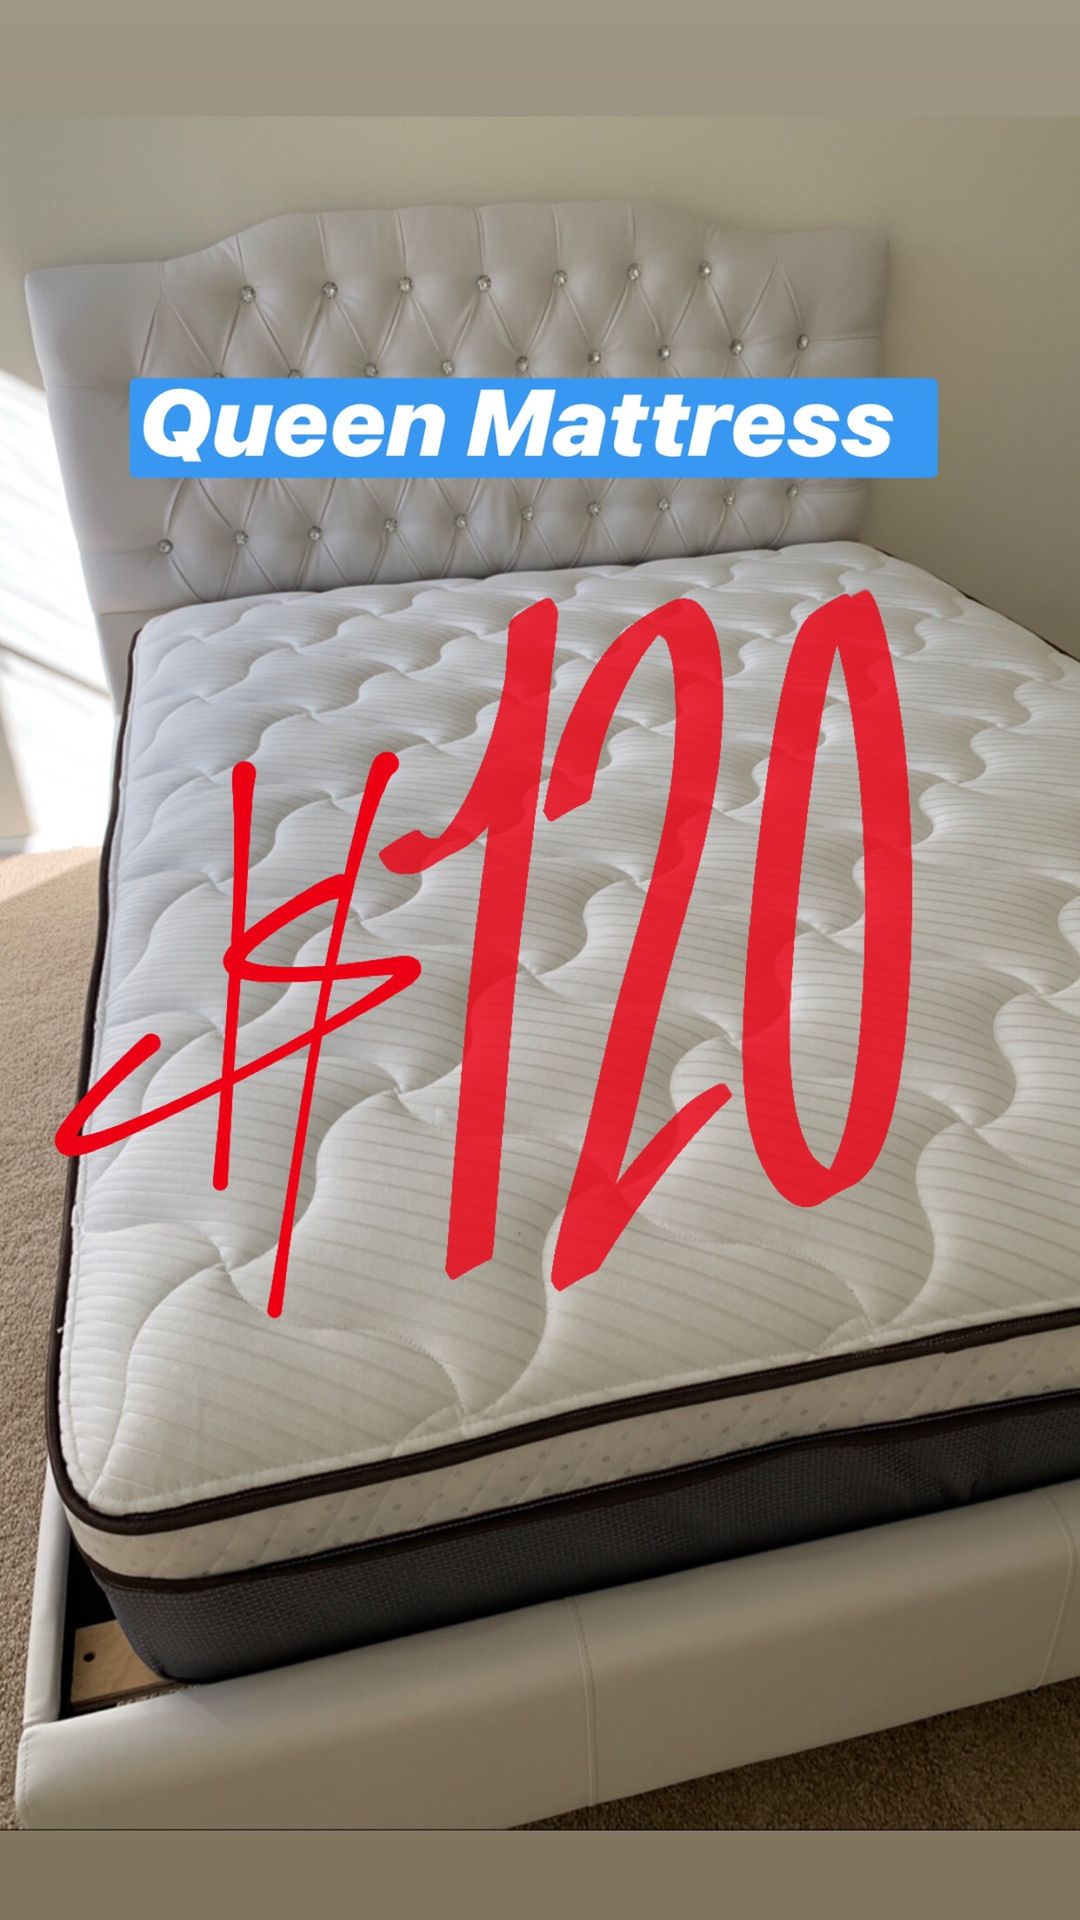 LOCATED IN LOS ANGELES $20 Delivery Fee ‼️ BRAND NEW PILLOW TOP MATTRESSES💯 COLCHONES NUEVOS PILLOW TOP 💯 Queen $120 ❌ $180 With Box Spring 💥💥 F